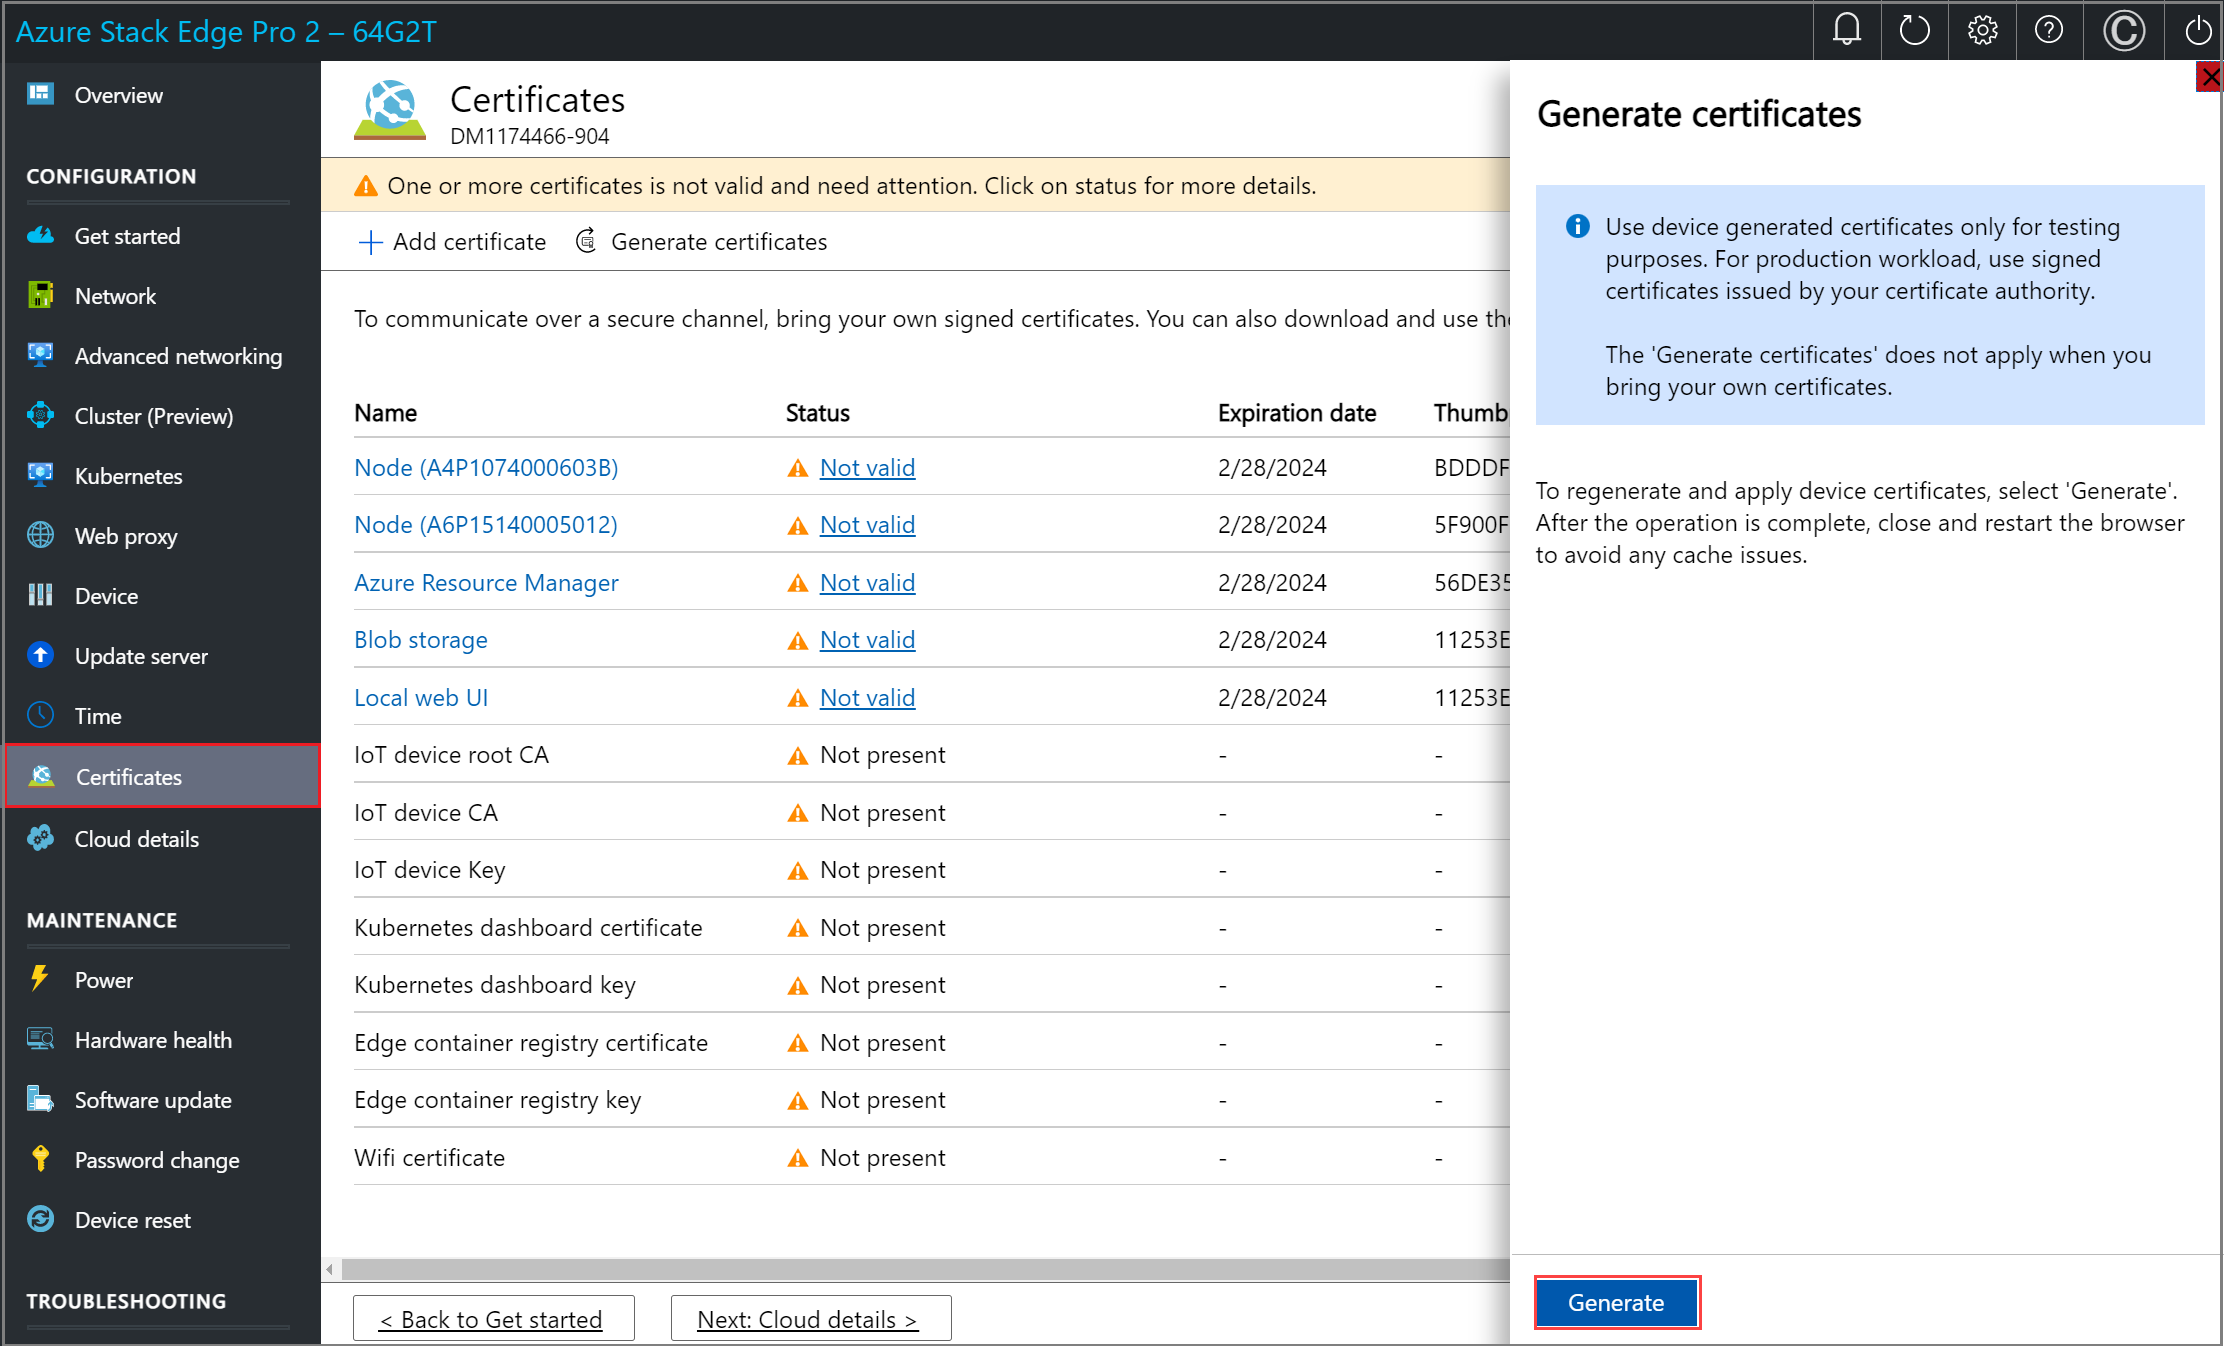 Screenshot of the Generate Certificates pane for an Azure Stack Edge device. The Generate button is highlighted.